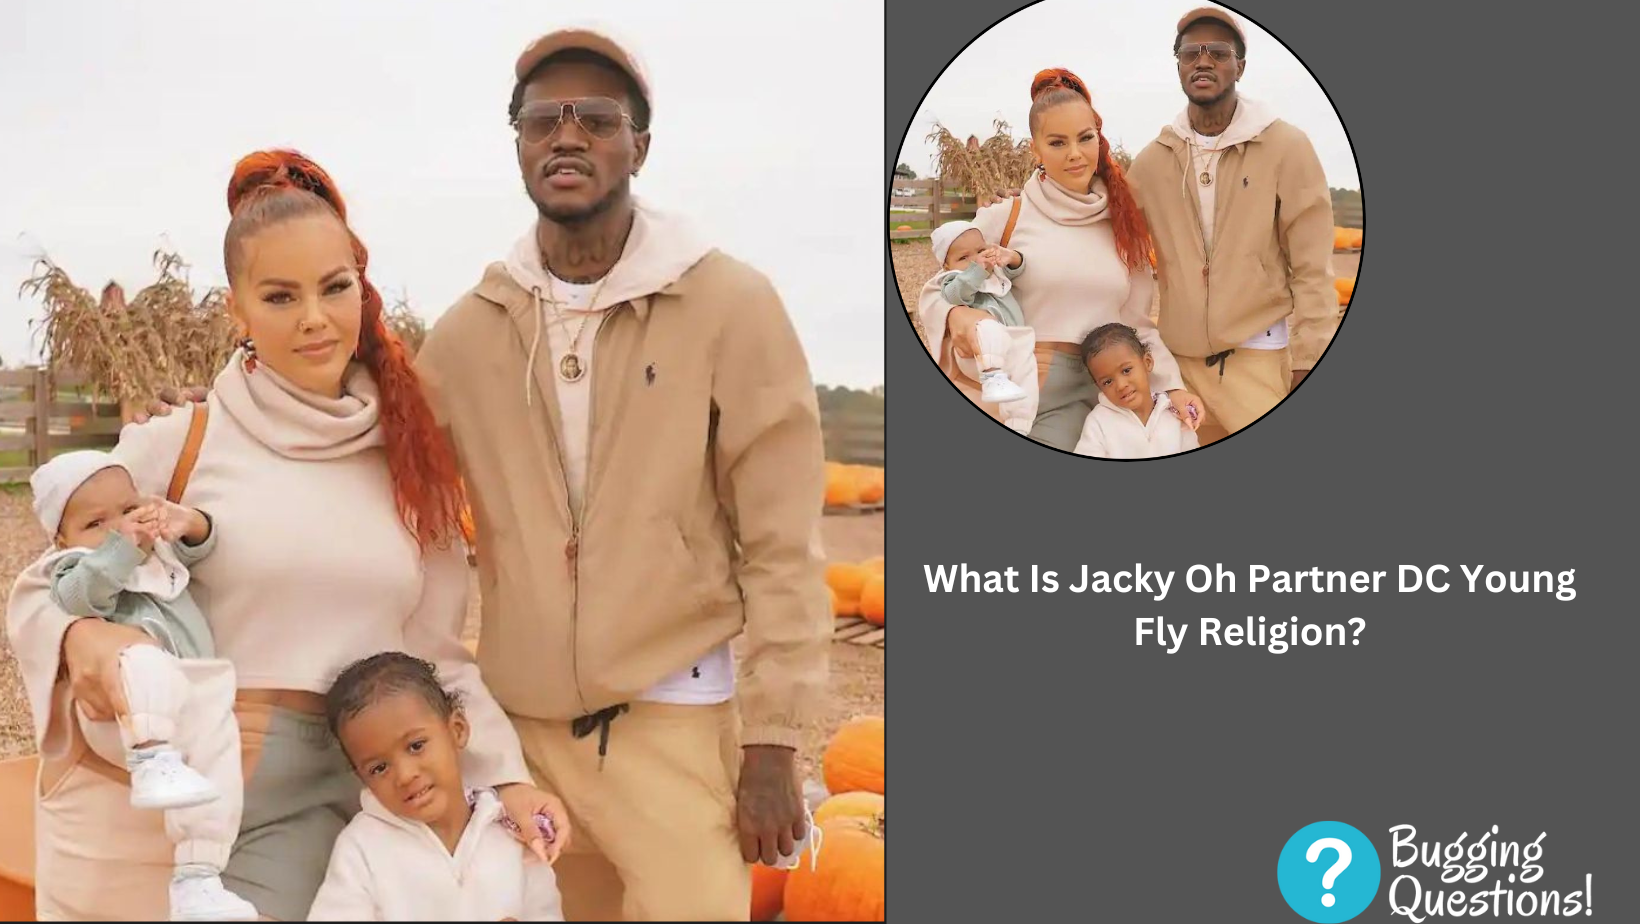 What Is Jacky Oh Partner DC Young Fly Religion?